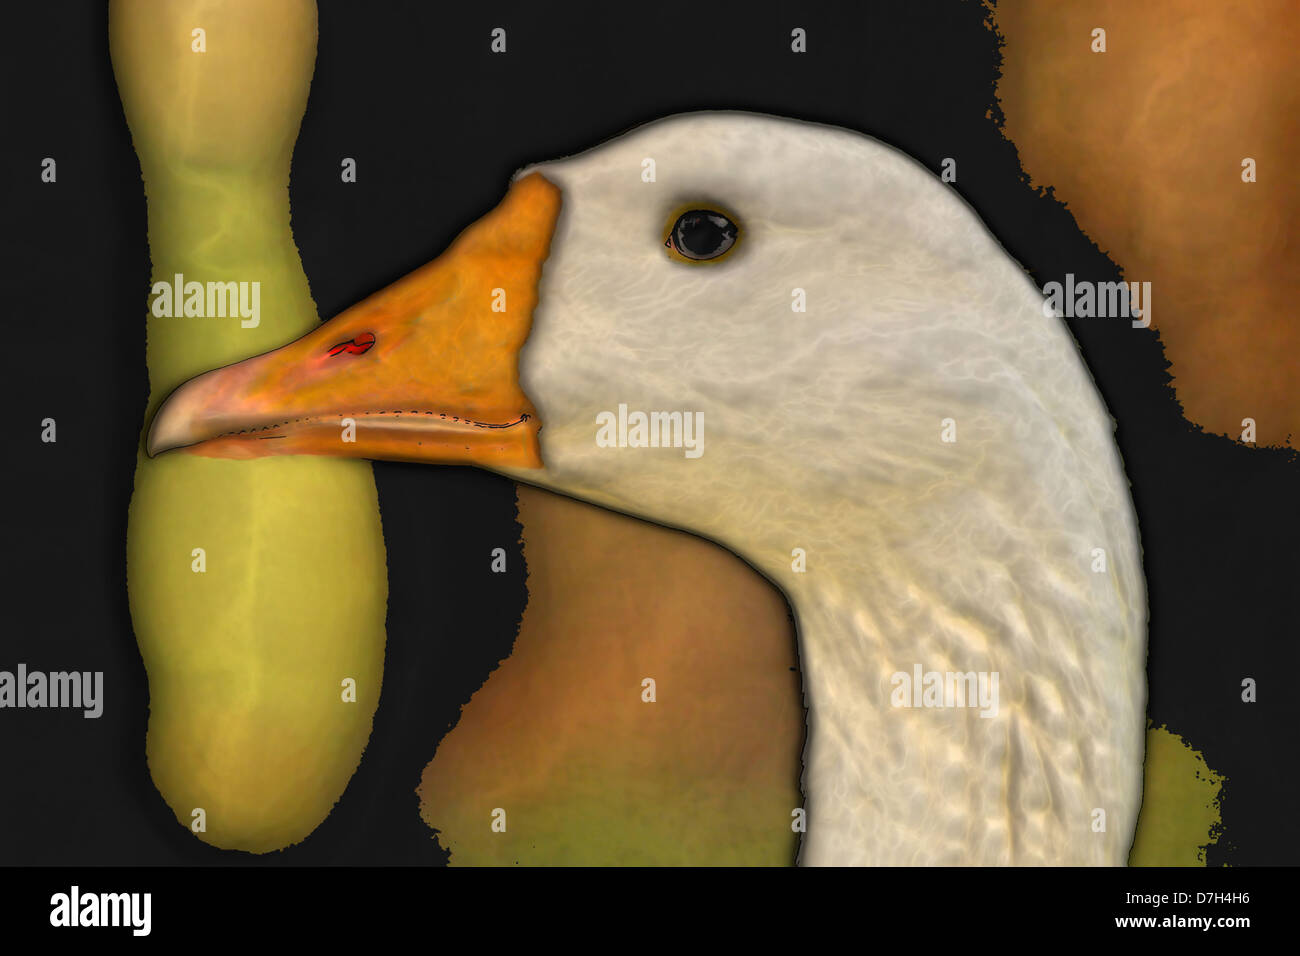 Colorful Portrait Painting of a Goose Head Stock Photo